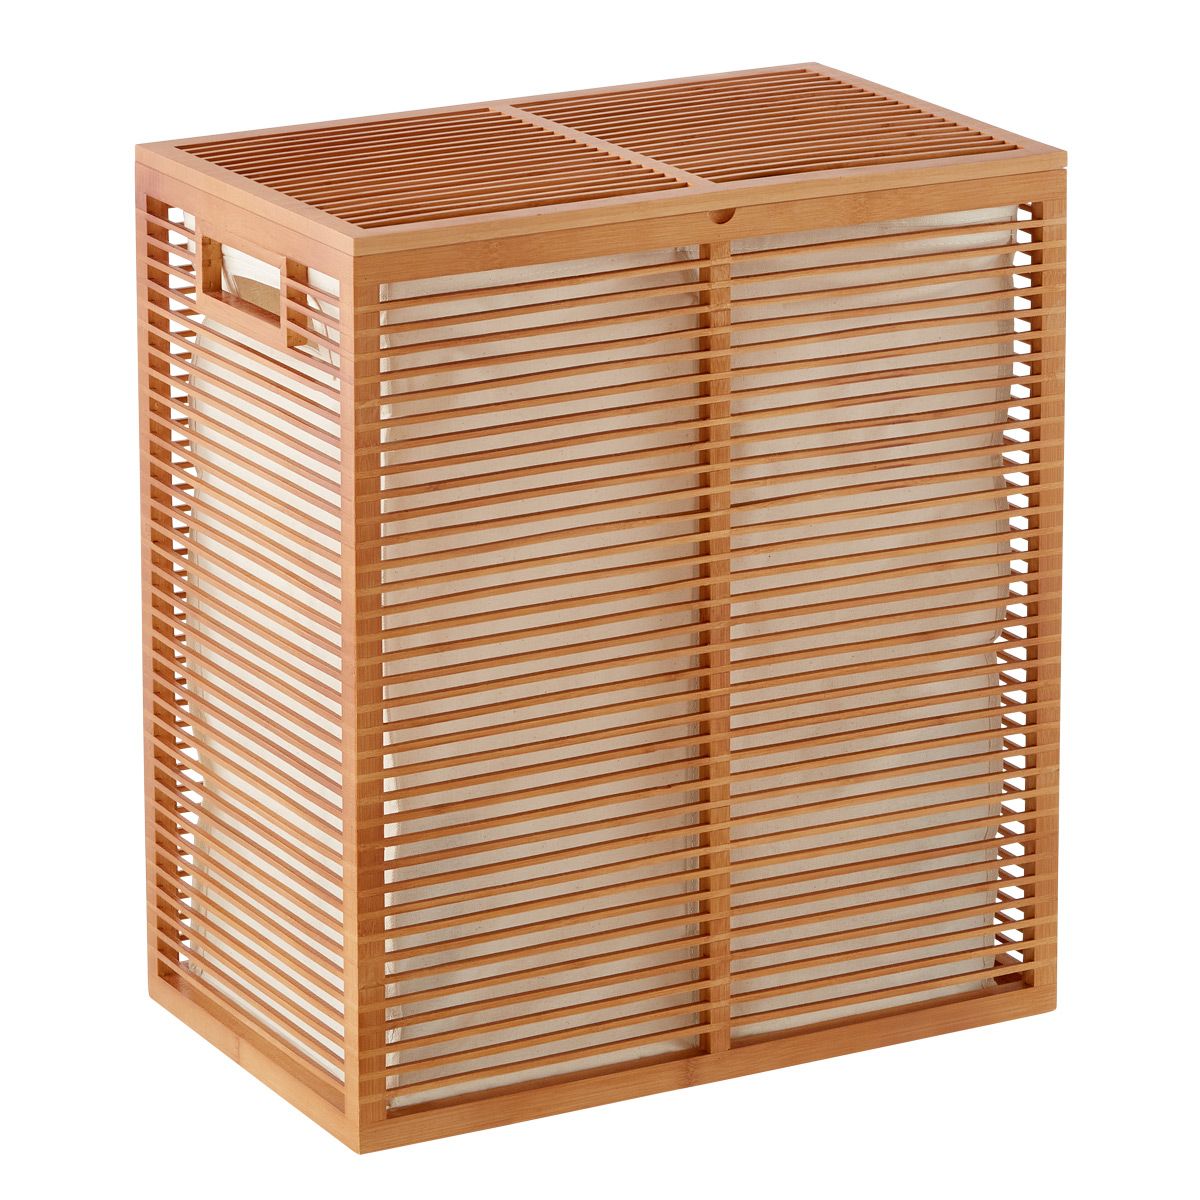 Bamboo Hamper | The Container Store